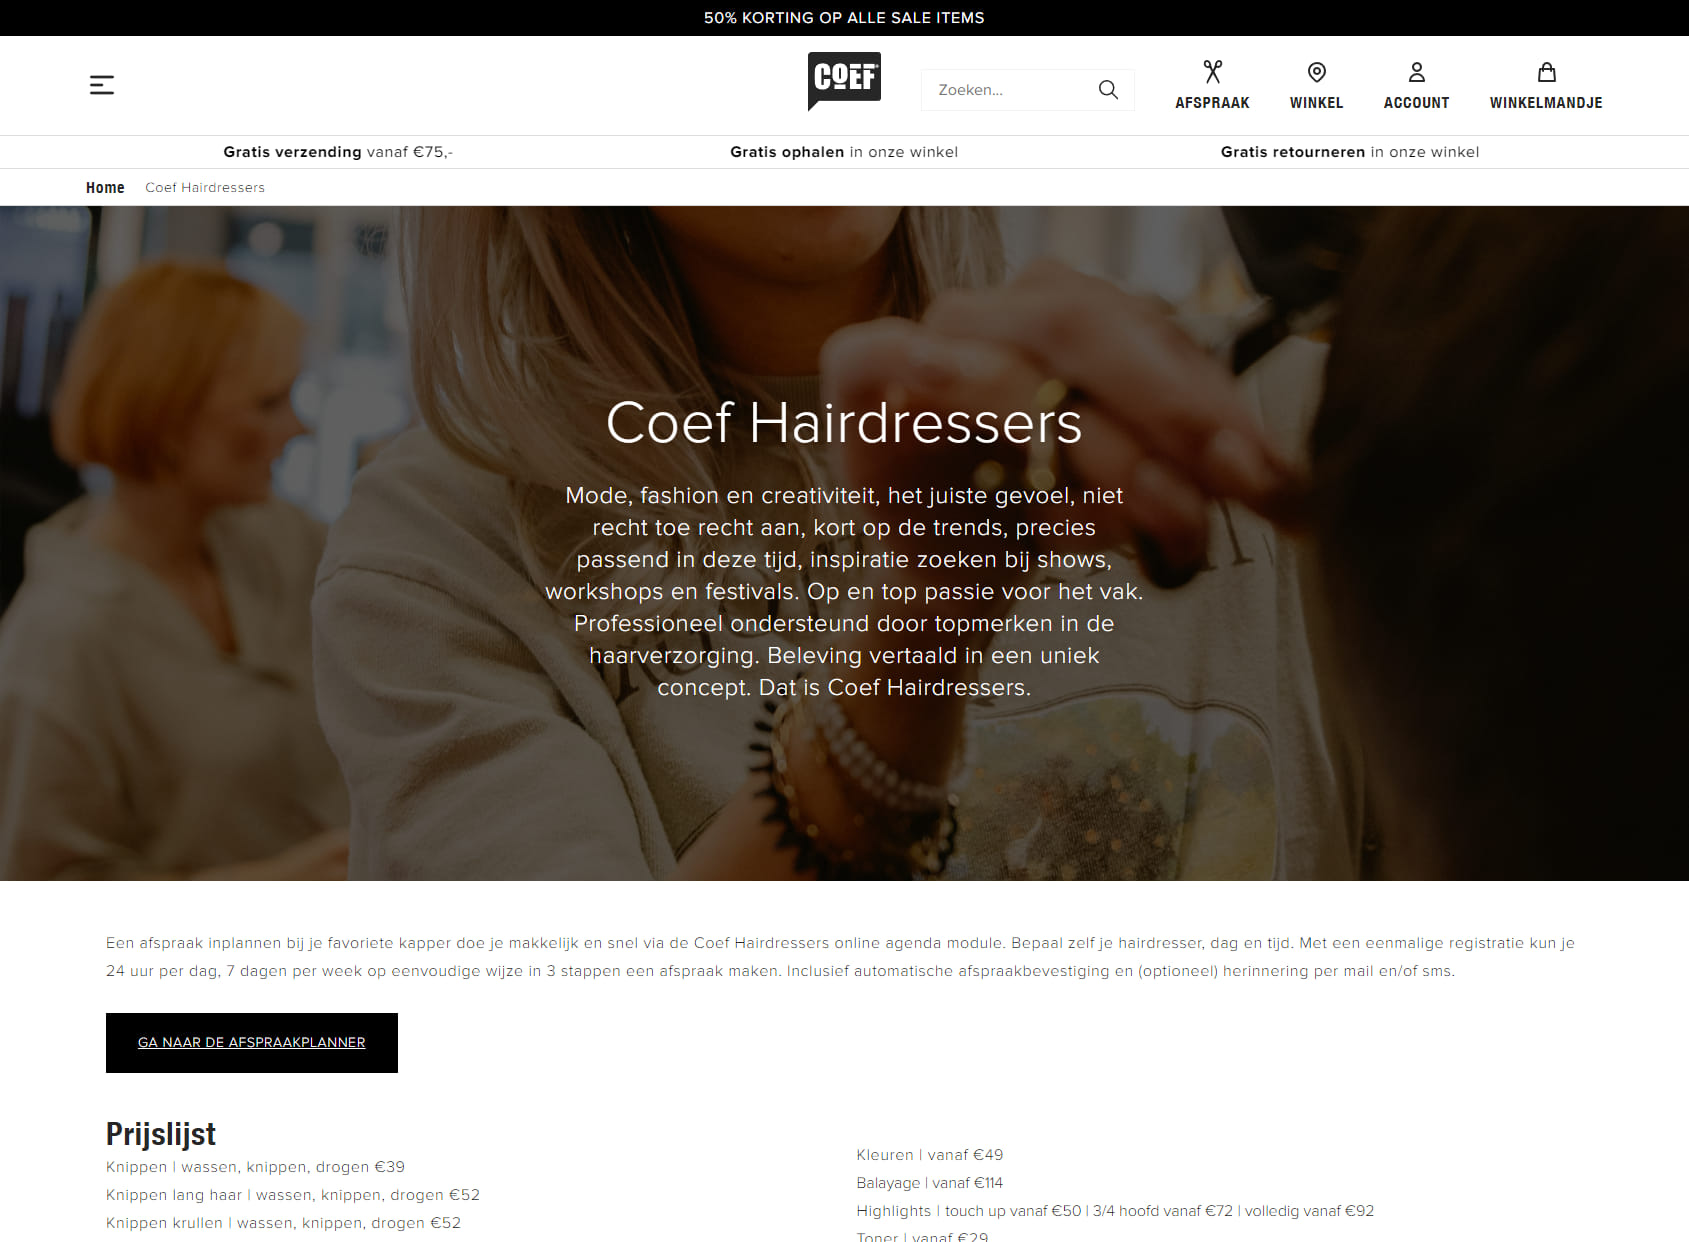 COEF Hairdressers